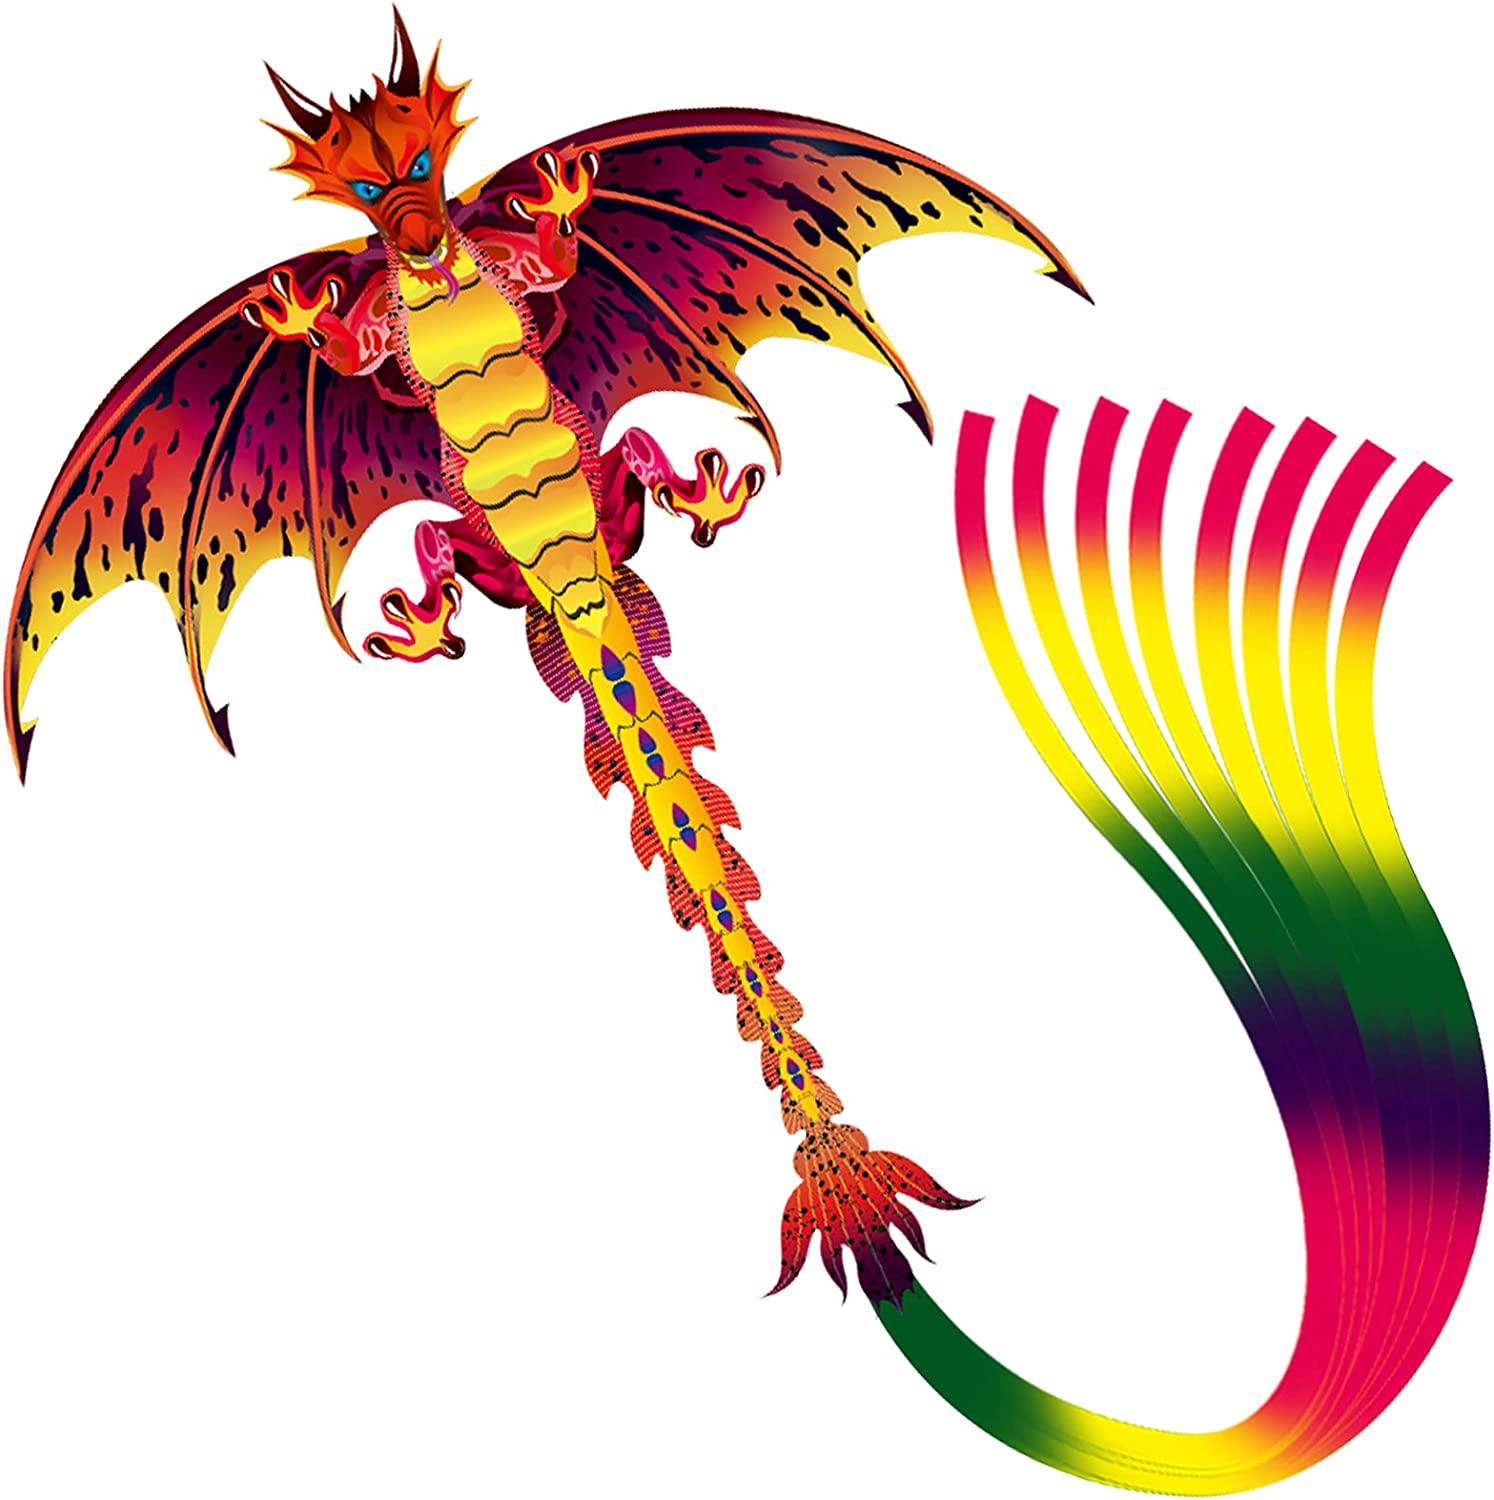 Lamonty, Lamonty Red Dragon Kite - Beautiful andÂ Easy Flyer Kite for Children and Adult with Long Colorful Tail String Line Accessories Easy to Soar High Outdoor Sports Game Activities or Beach Trip